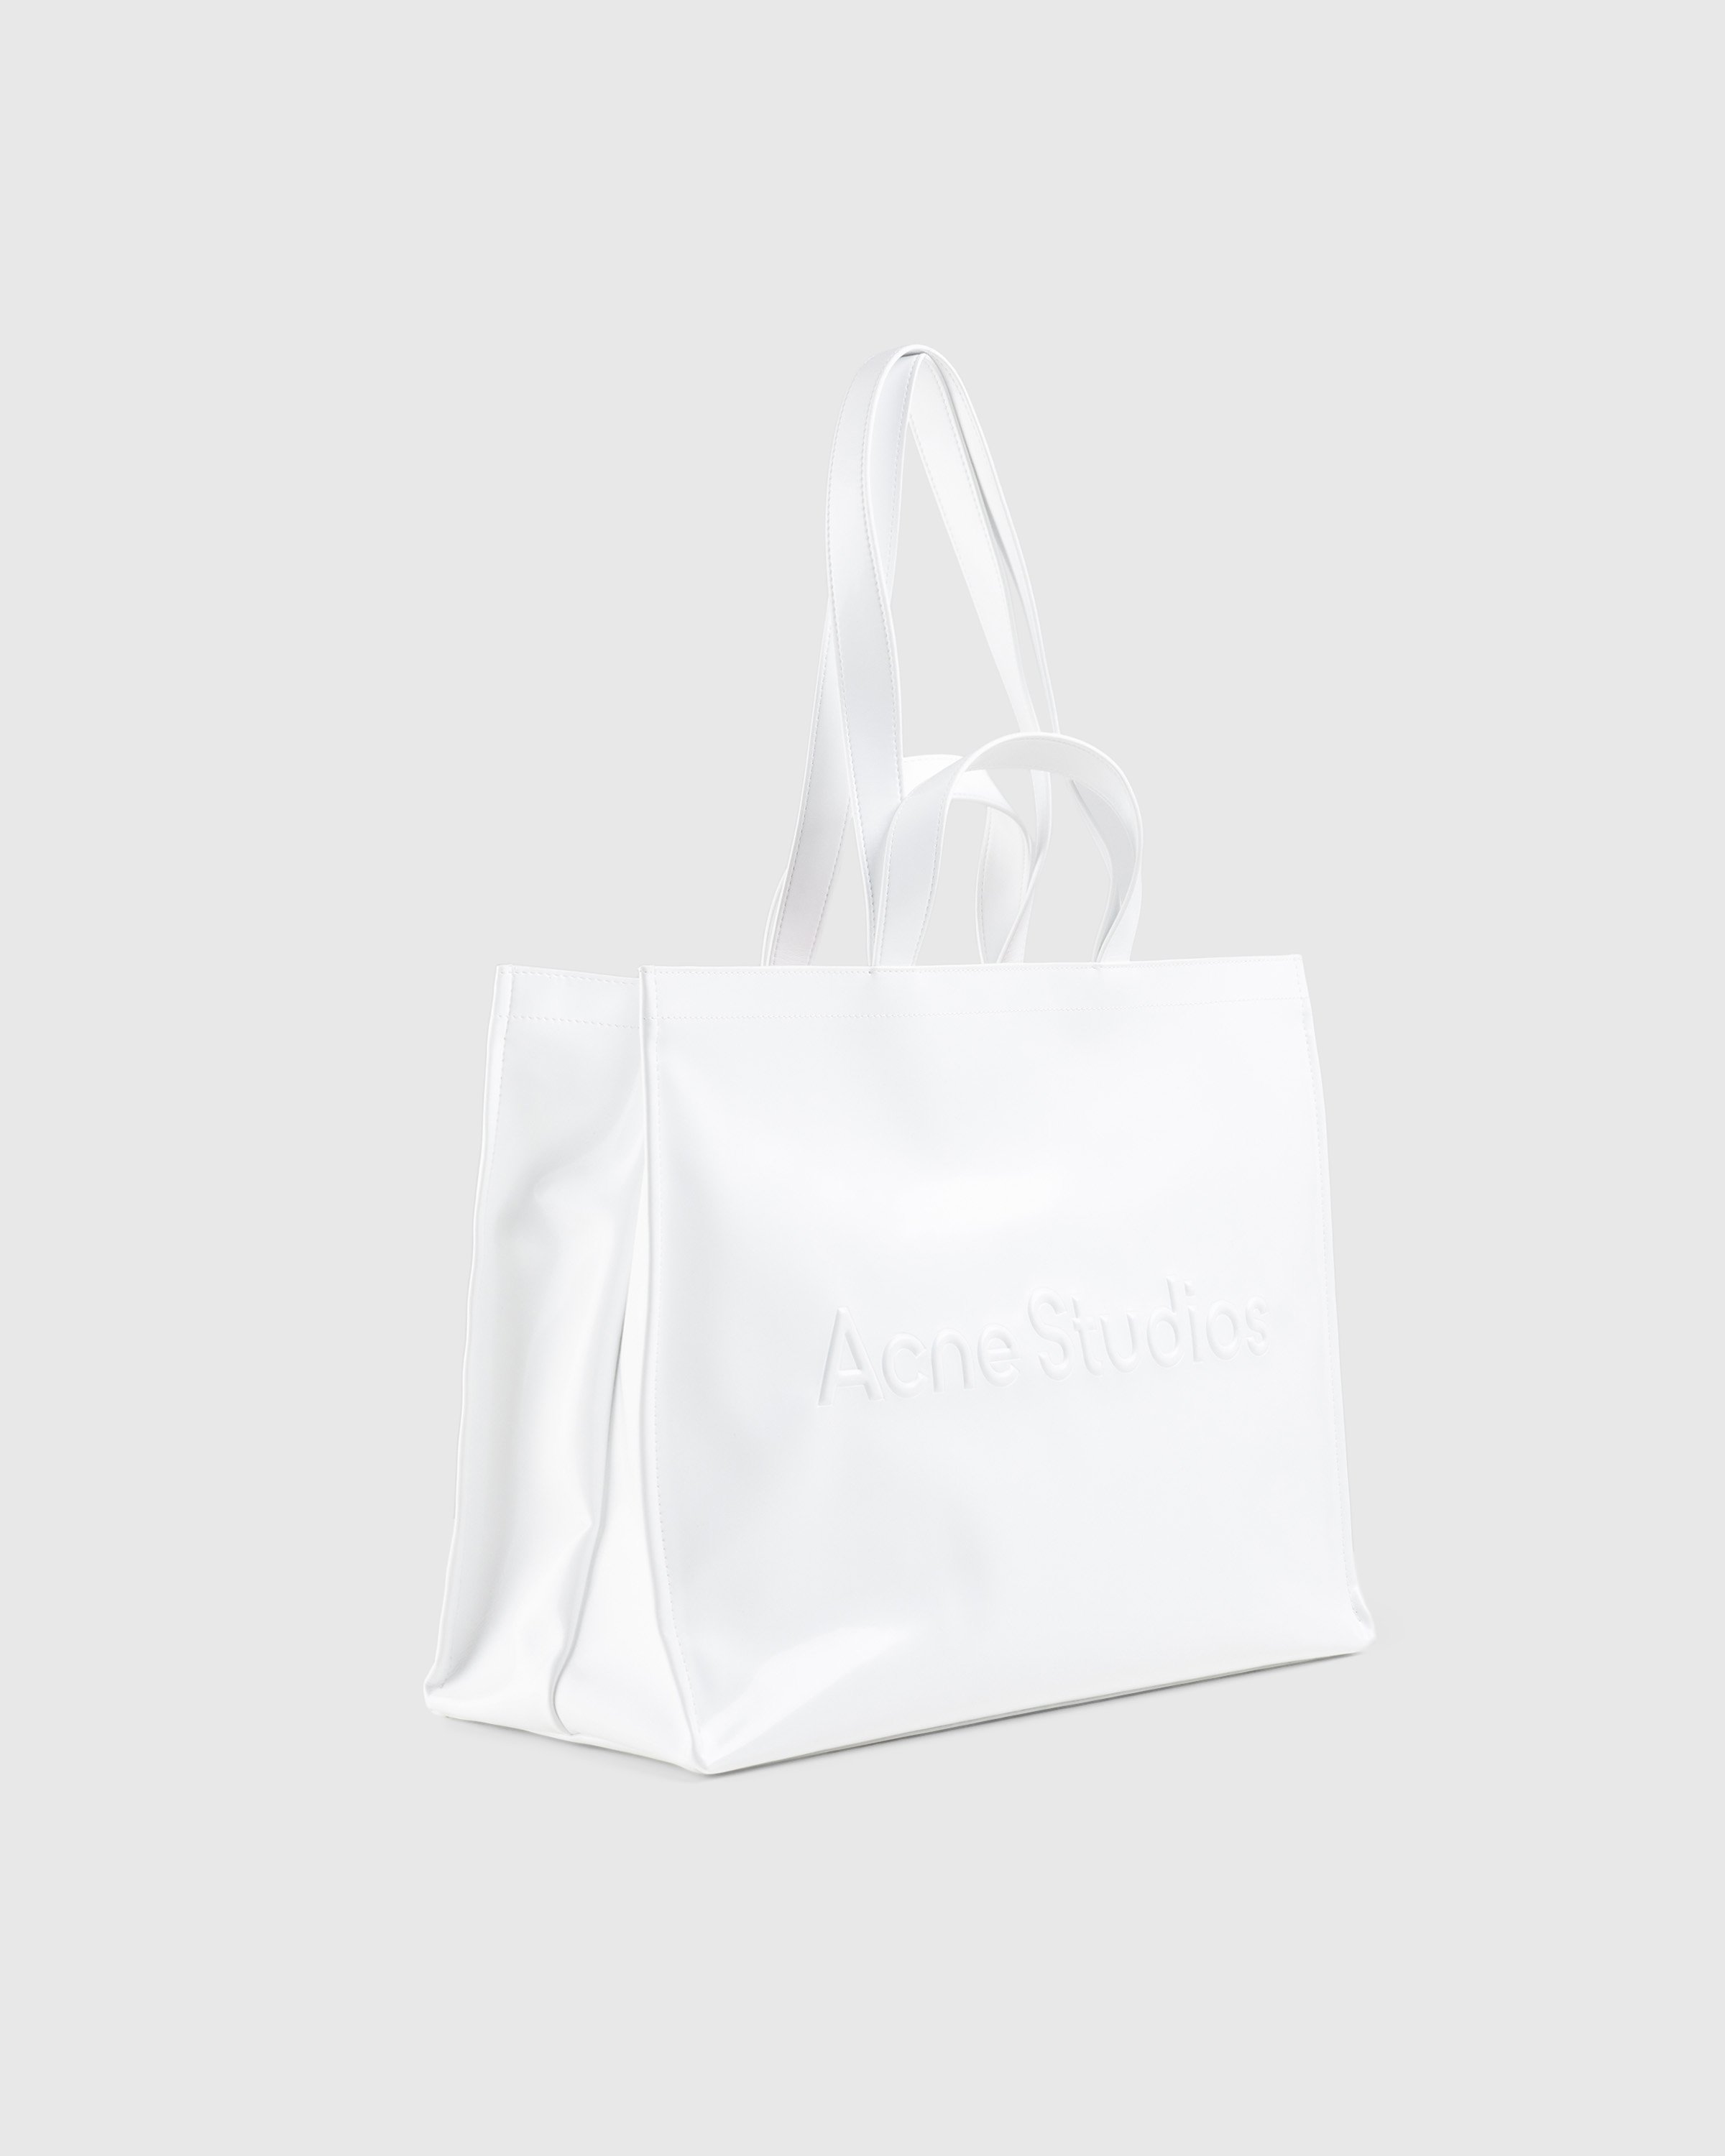 Acne Studios - East-West Tote Bag White - Accessories - White - Image 3